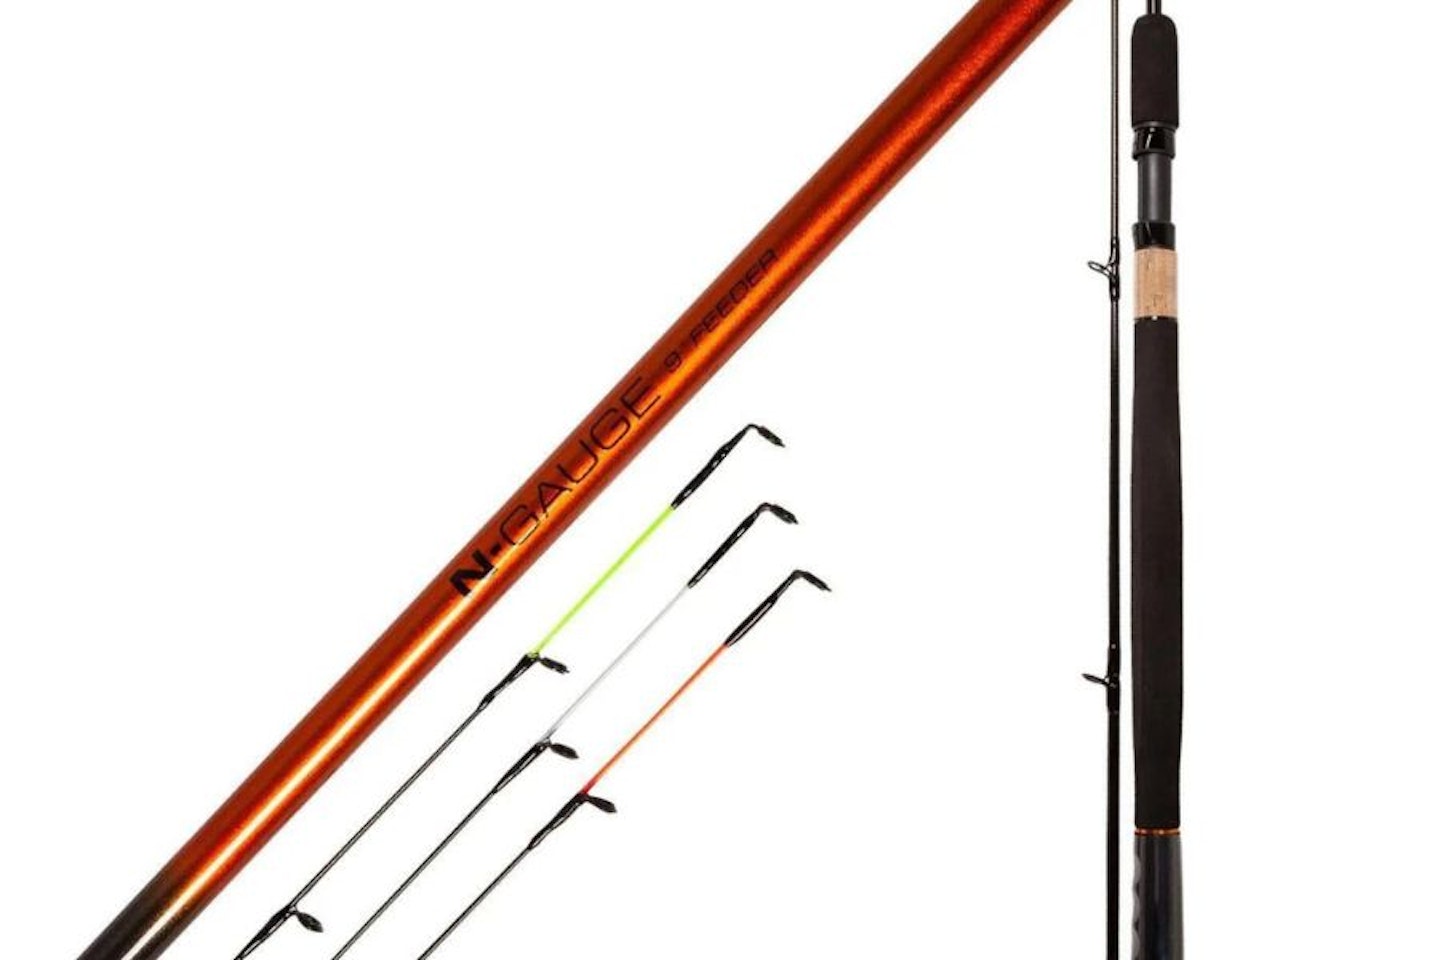 Daiwa Spectron Commercial Ultra Feeder Rods - £199.99